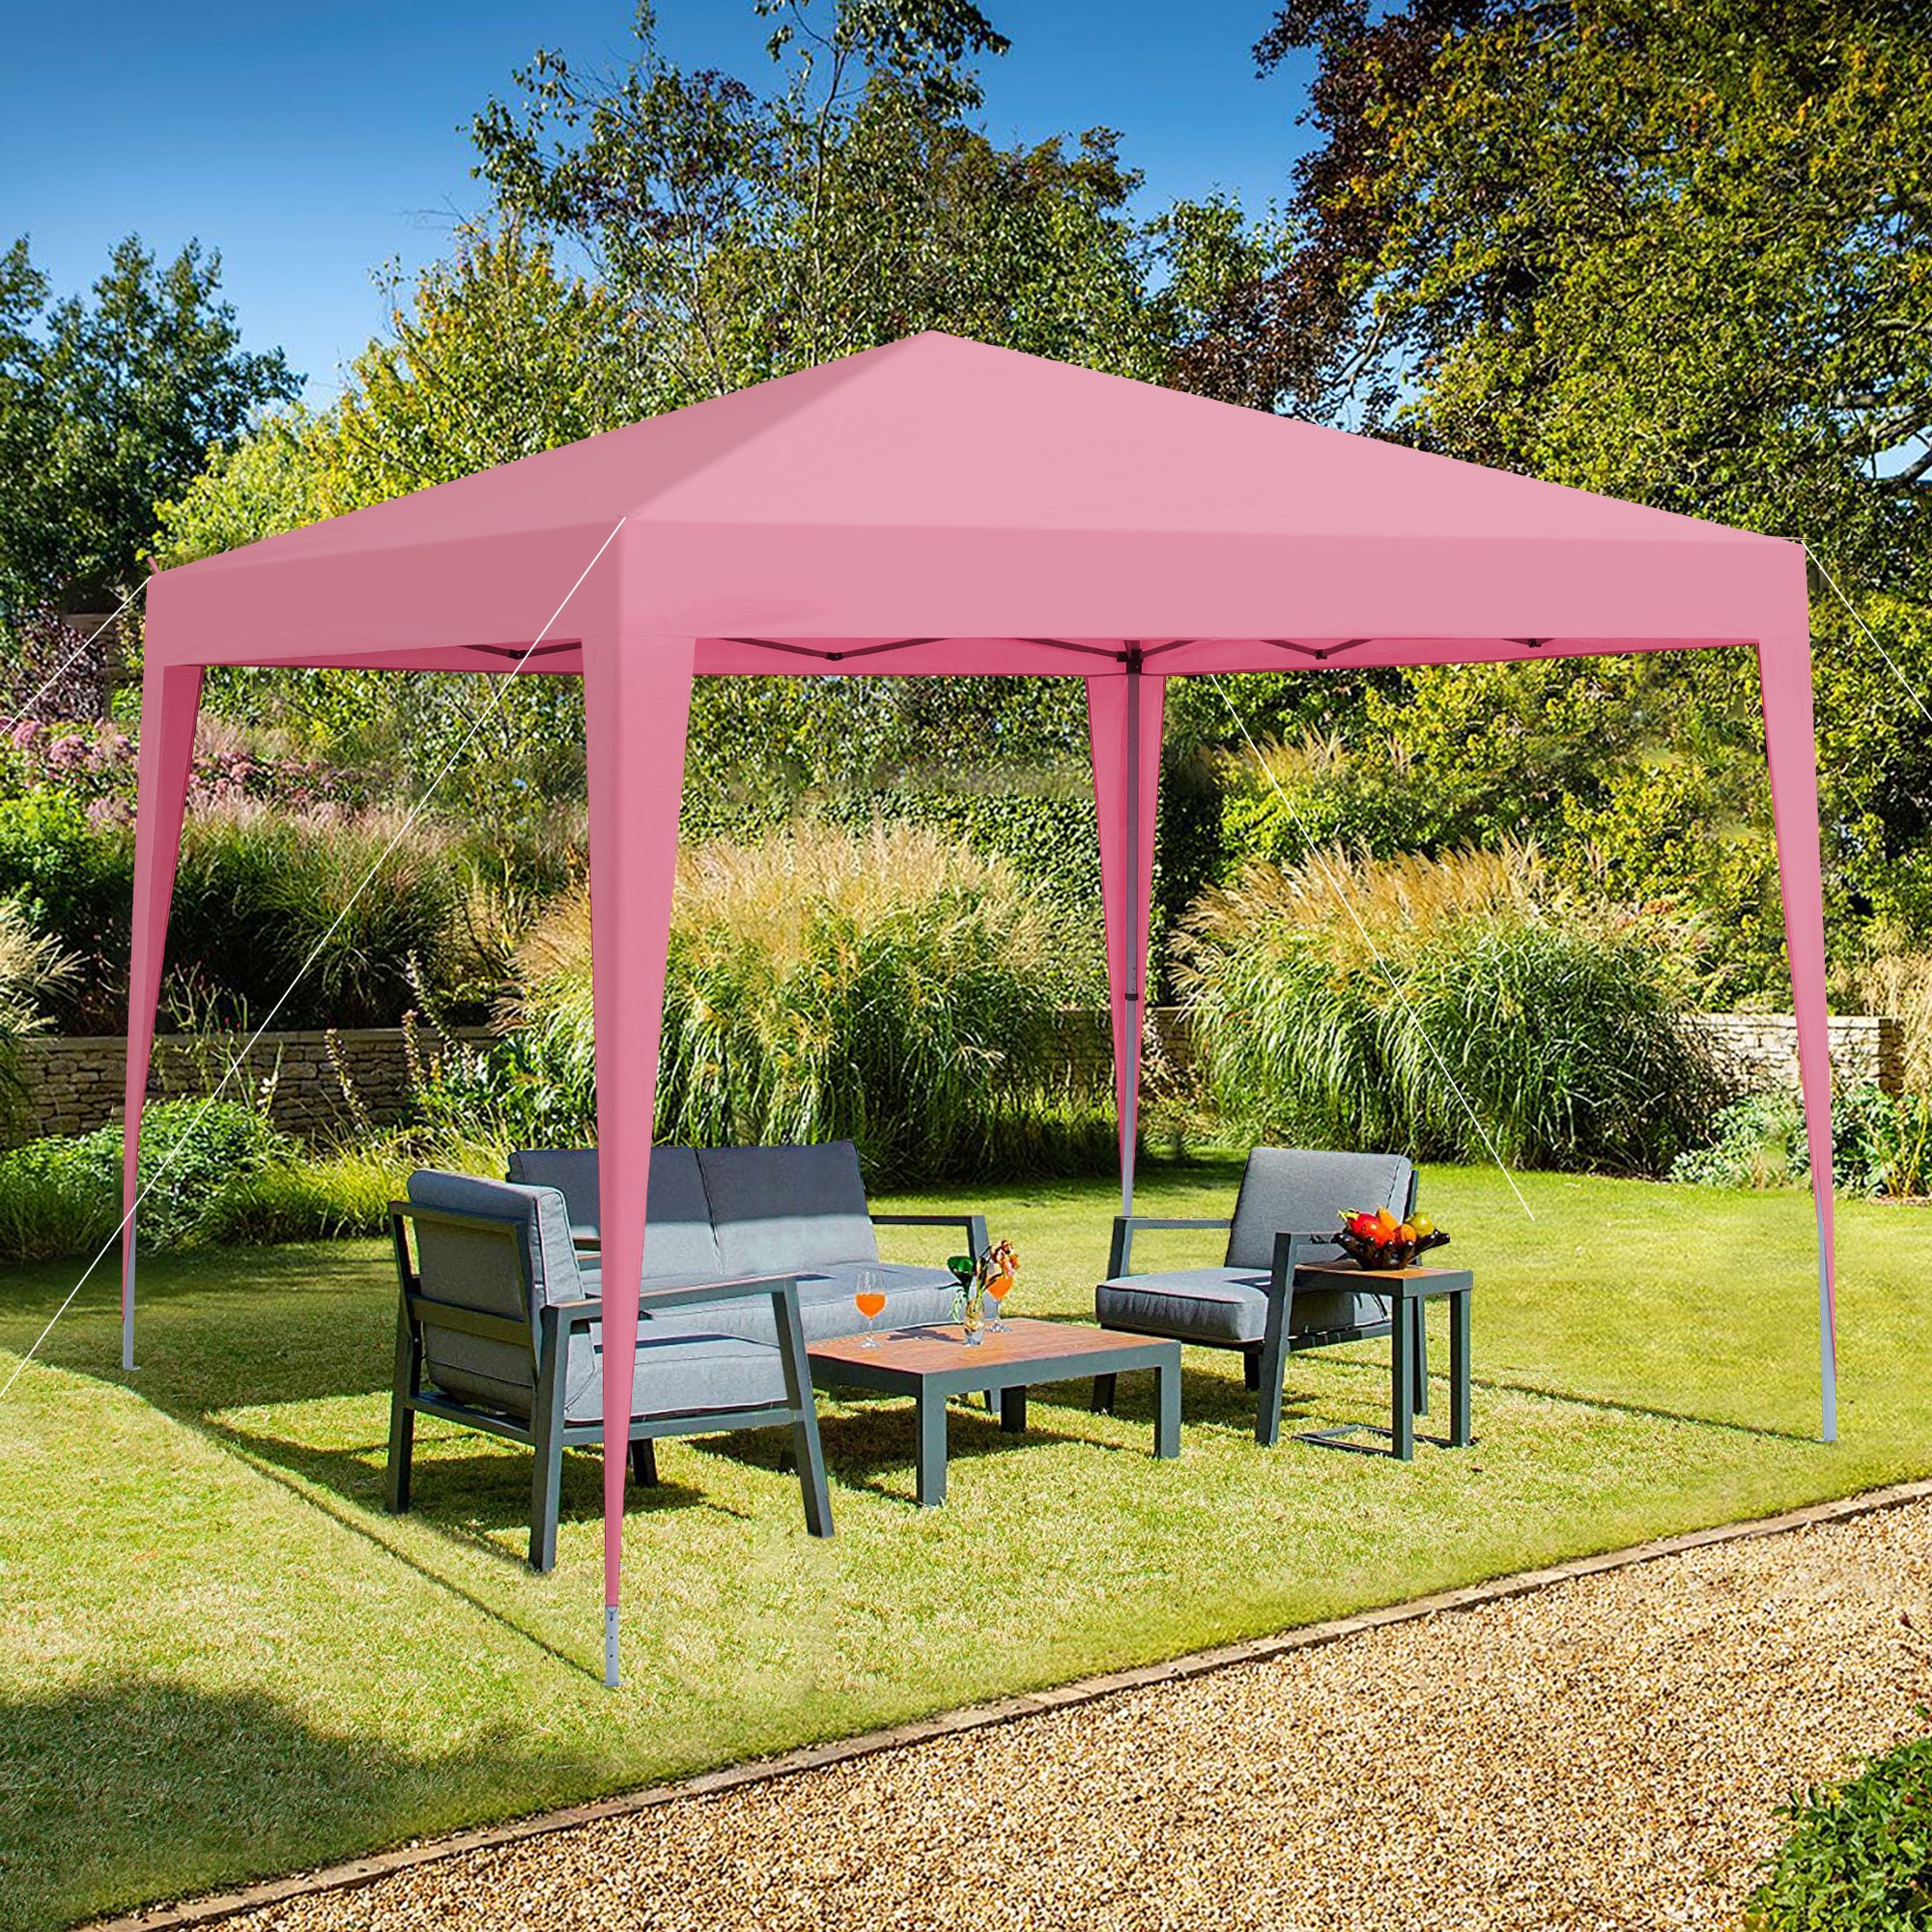 Outdoor-10x-10Ft-Pop-Up-Gazebo-Canopy-Tent-with-4pcs-Weight-sand-bag,with-Carry-Bag-Pink-Umbrellas-&-Sunshades